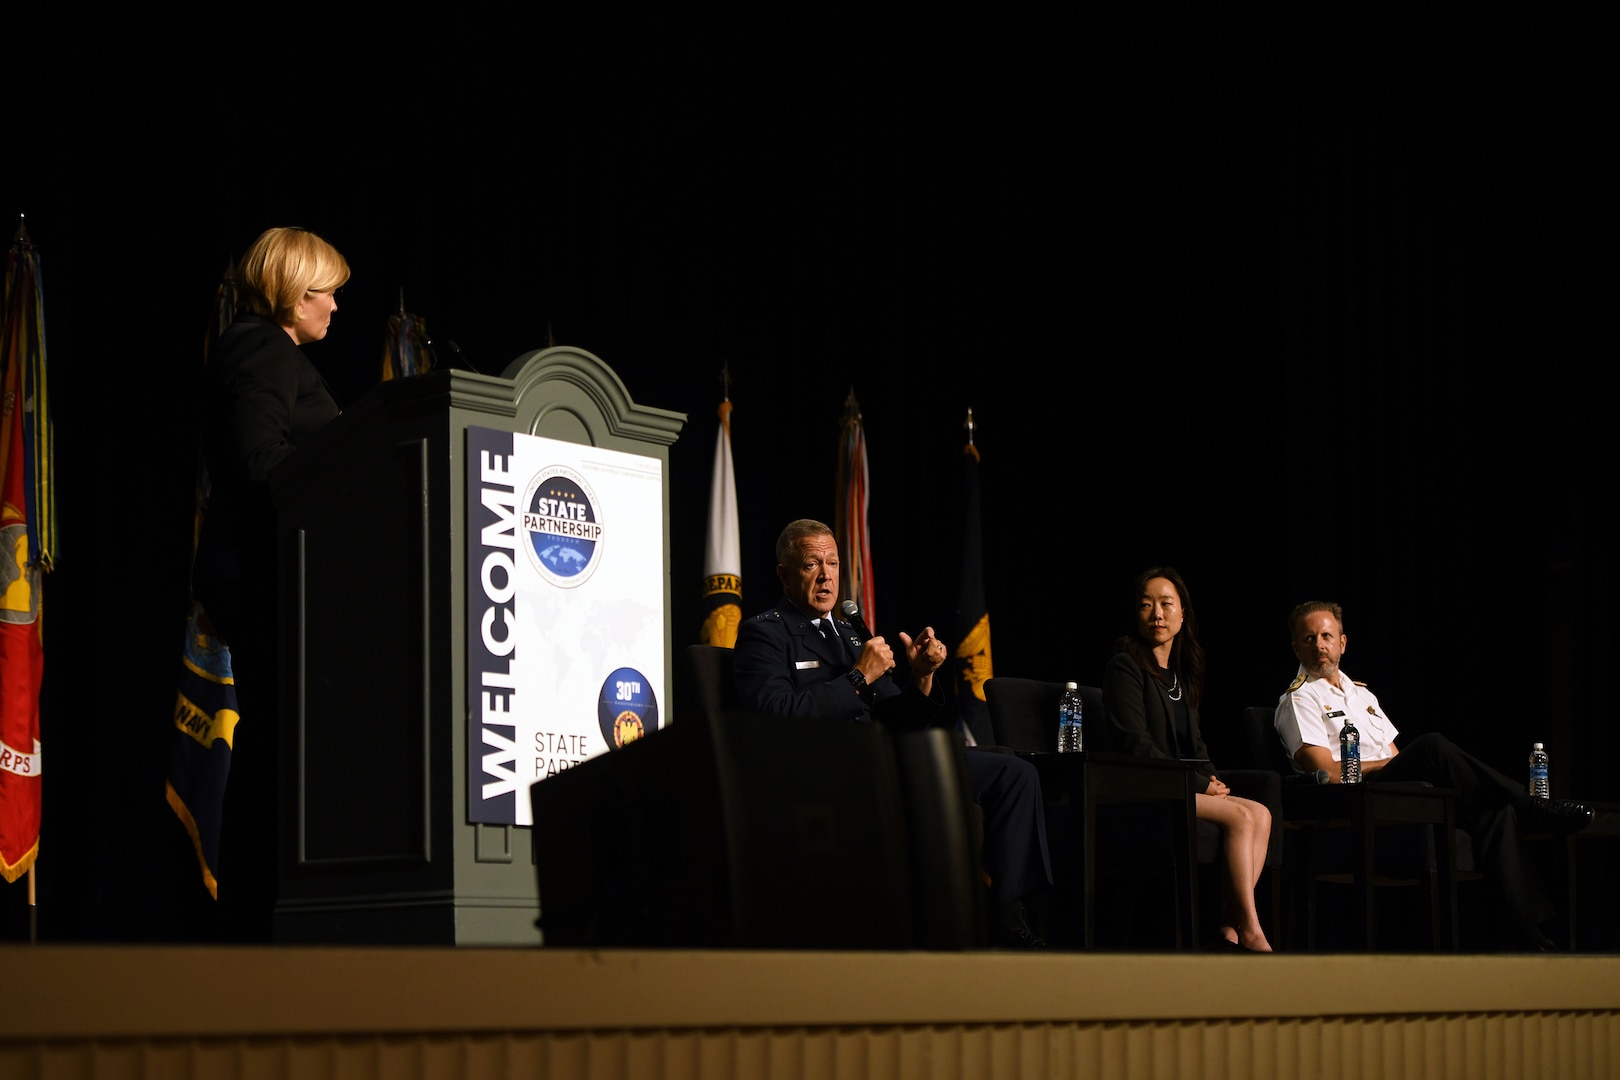 Air Force Maj. Gen. Richard Neely, the adjutant general of the Illinois National Guard, illustrates a point during a panel discussing cyber and information warfare at the Department of Defense National Guard State Partnership Program 30th Anniversary Conference at National Harbor, Maryland, July 18, 2023.